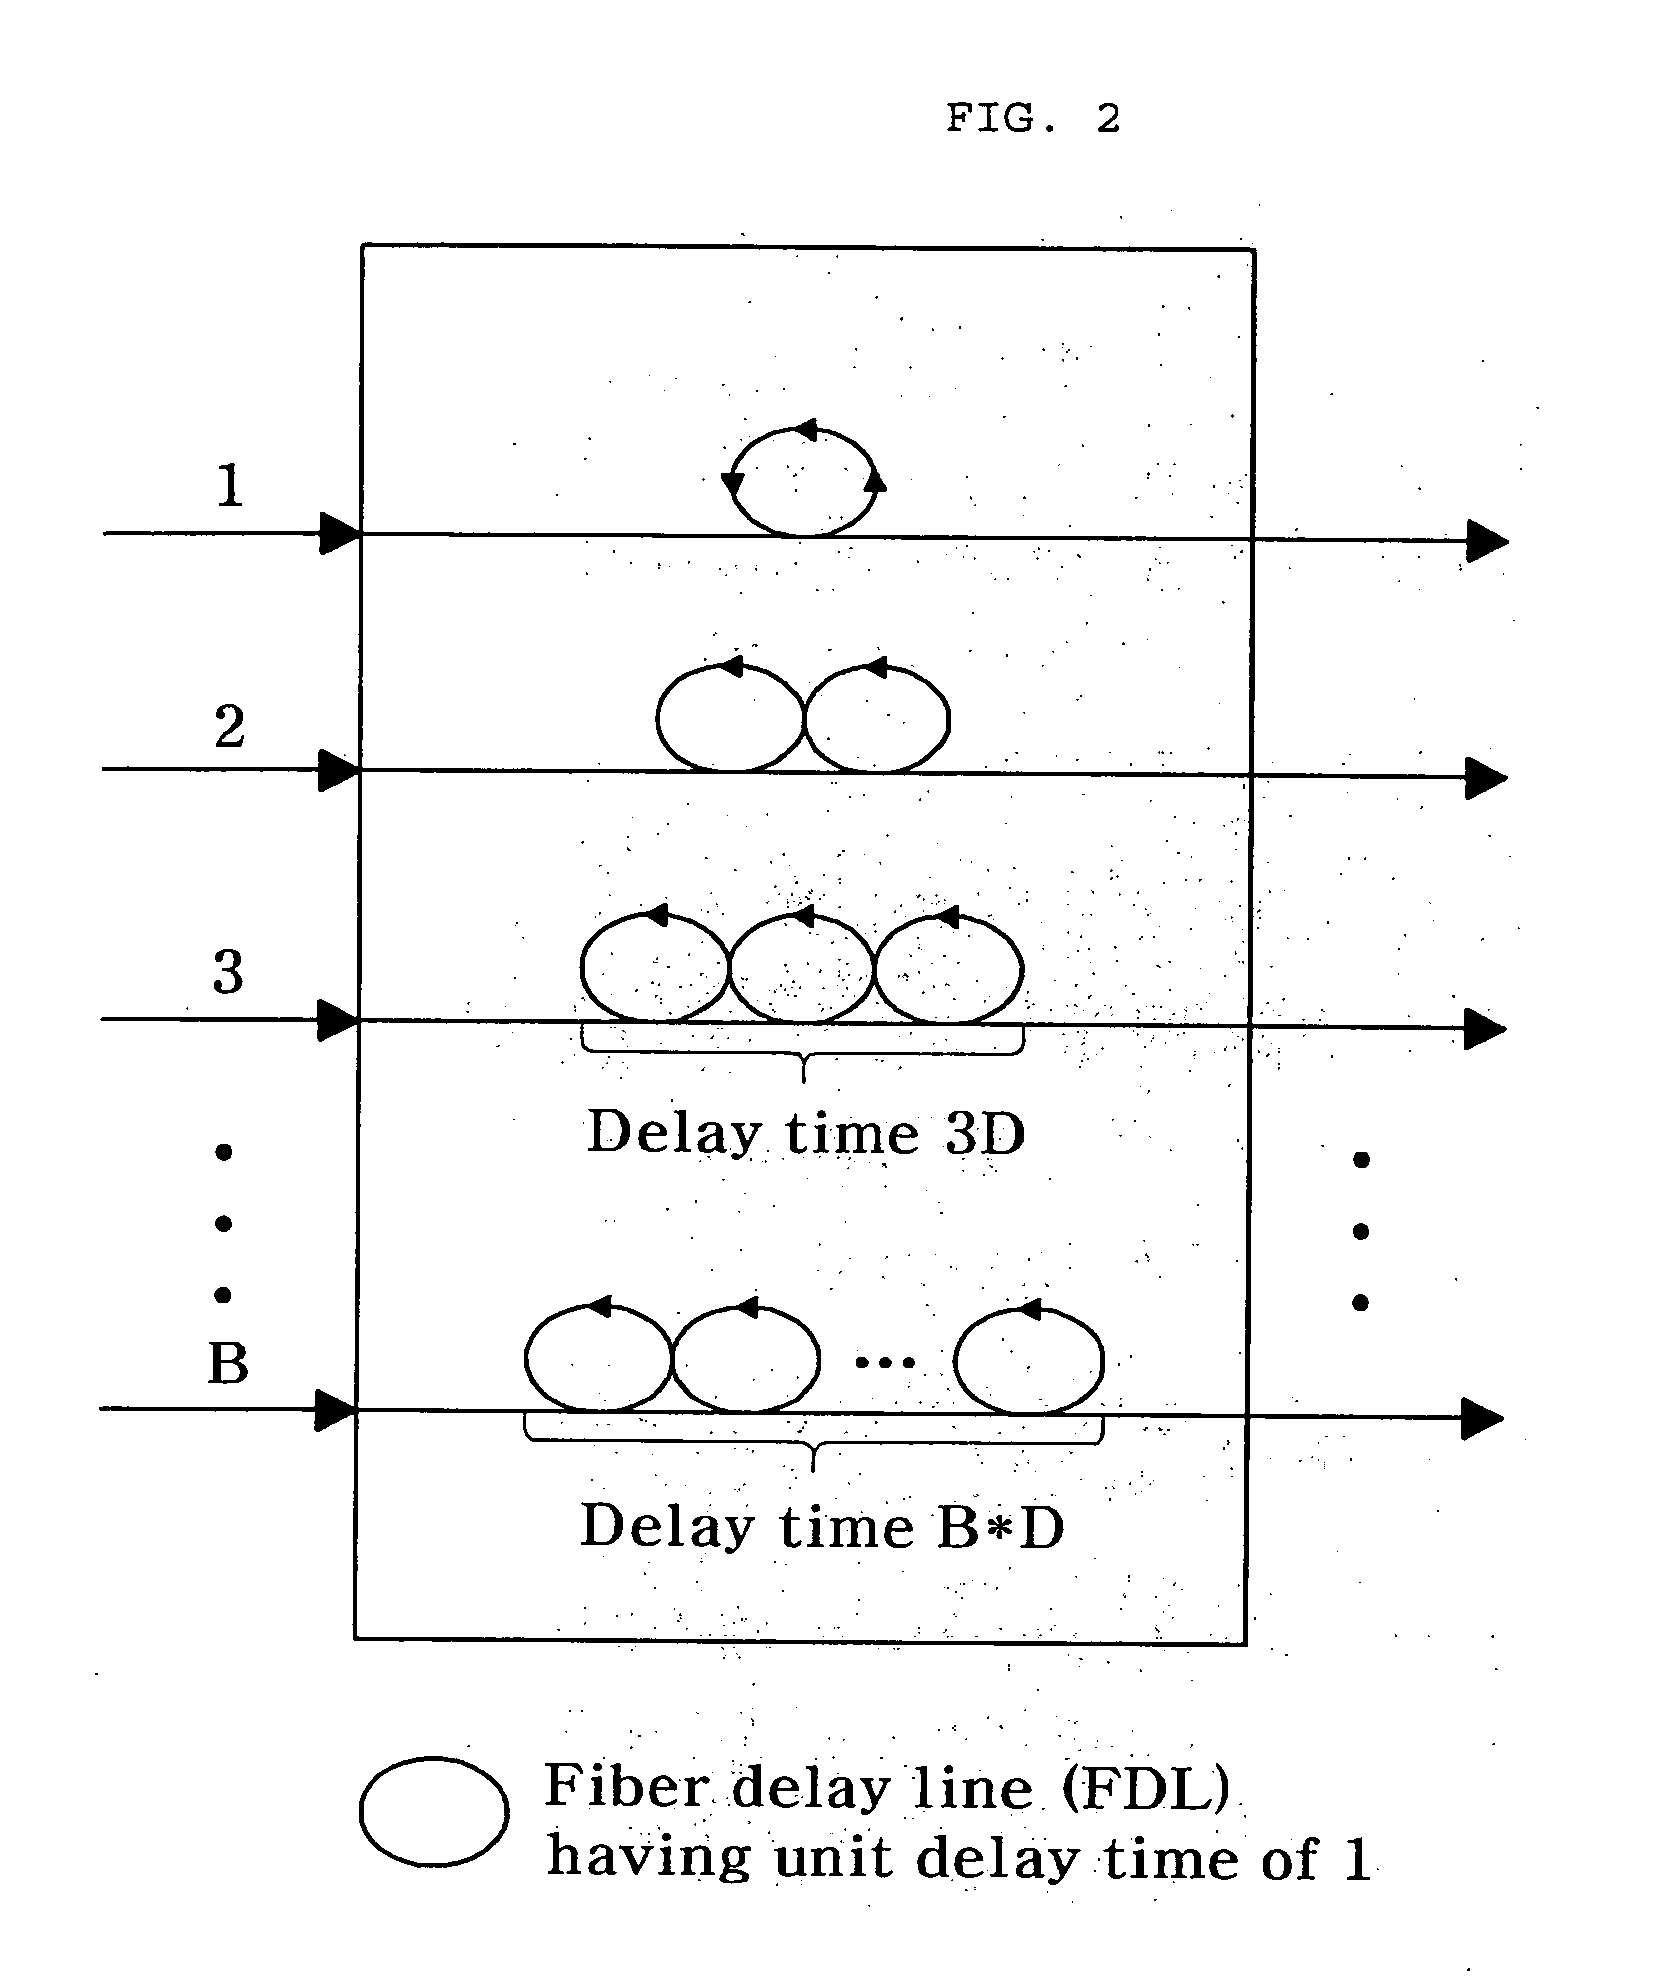 Apparatus and method for transferring data bursts in optical burst switching network